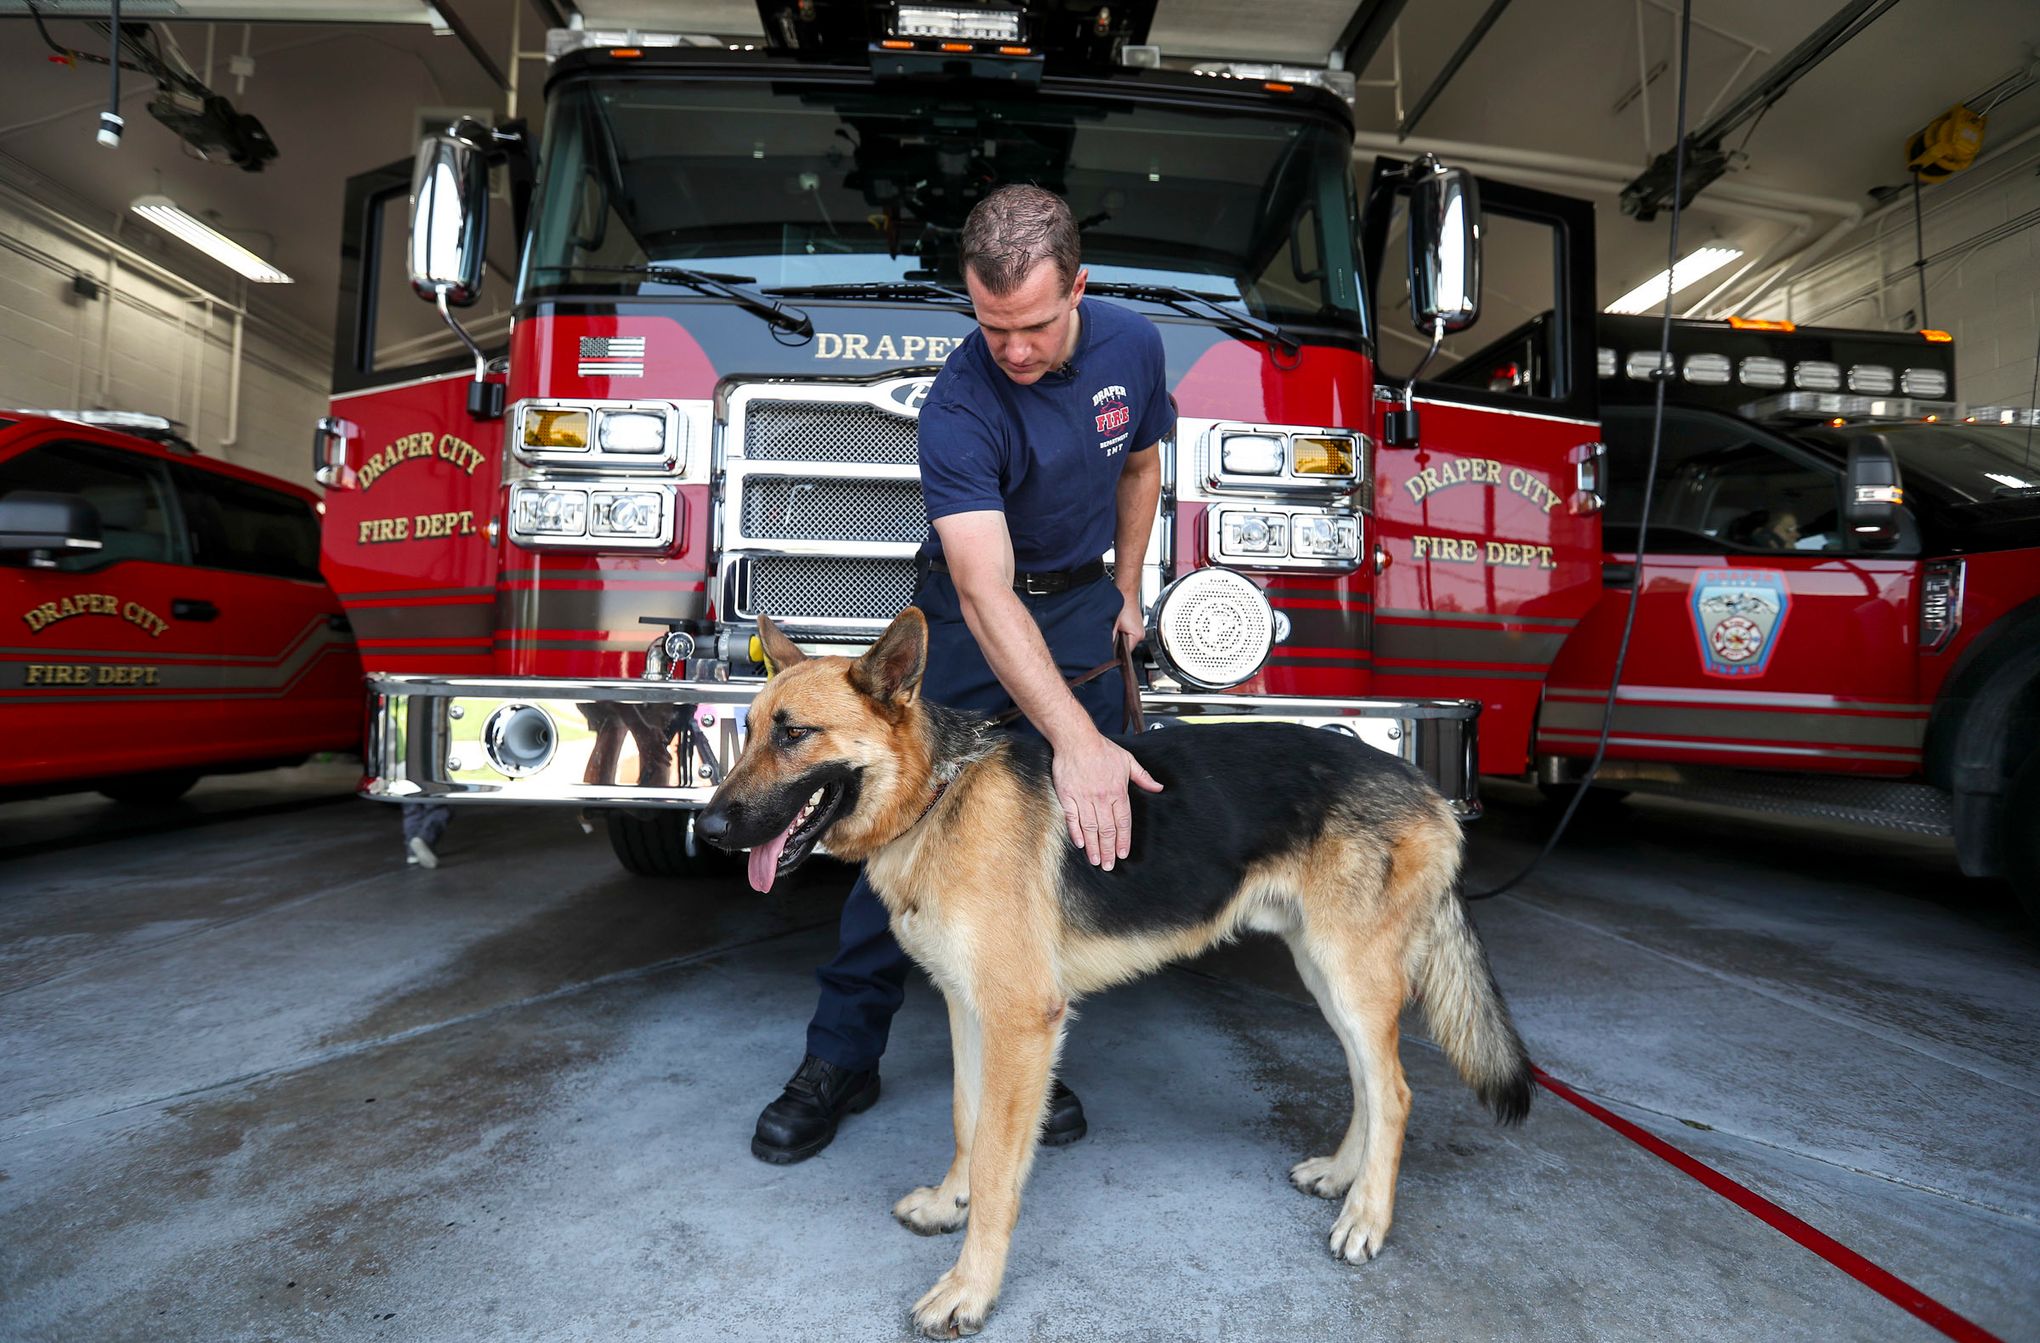 https://images.seattletimes.com/wp-content/uploads/2018/08/urn-publicid-ap-org-fd4a0133dc8a4f17b7f3b407d2de418bWestern_Wildfires_Adopted_Dog_02544.jpg?d=2040x1343